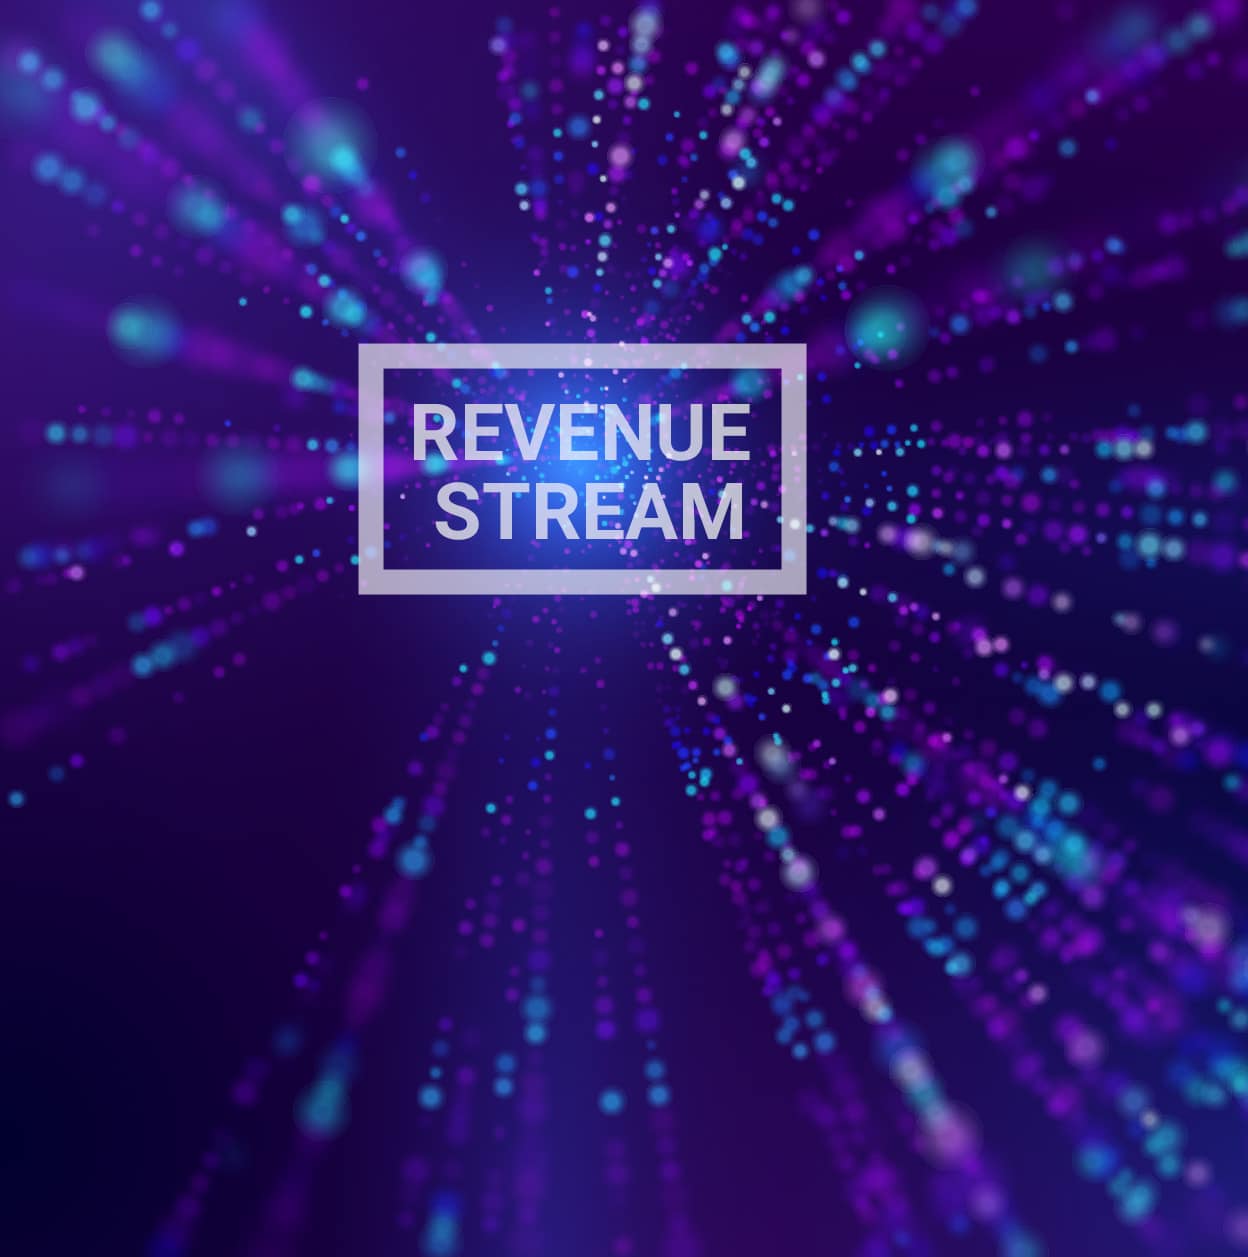 Revenue Stream words in front of blue background.